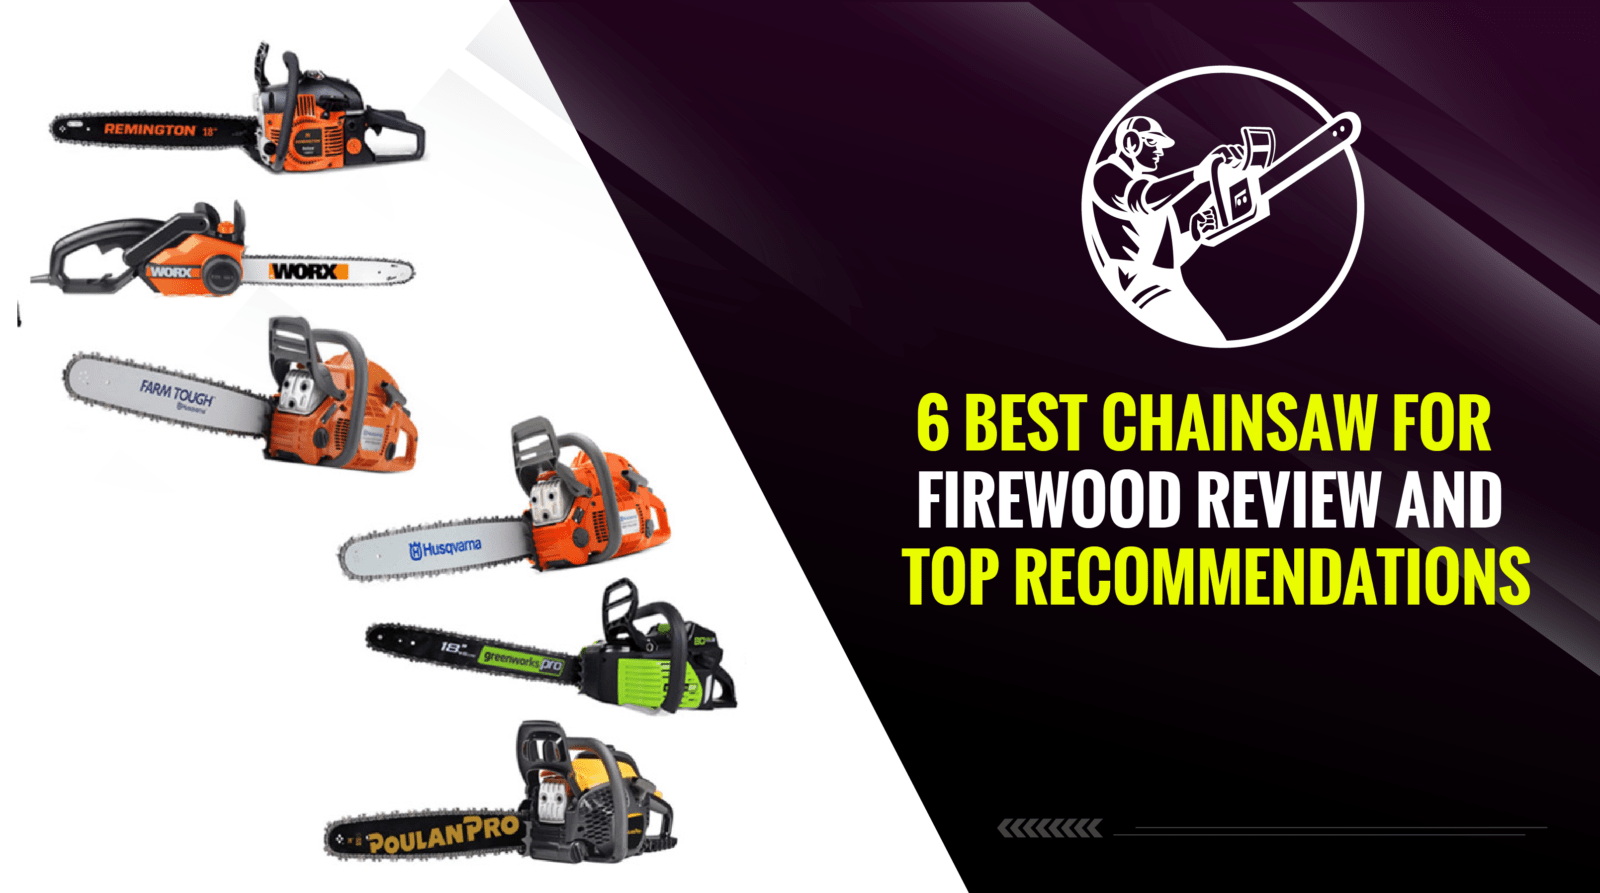 6 Best Chainsaw for Firewood Review And Top Recommendations